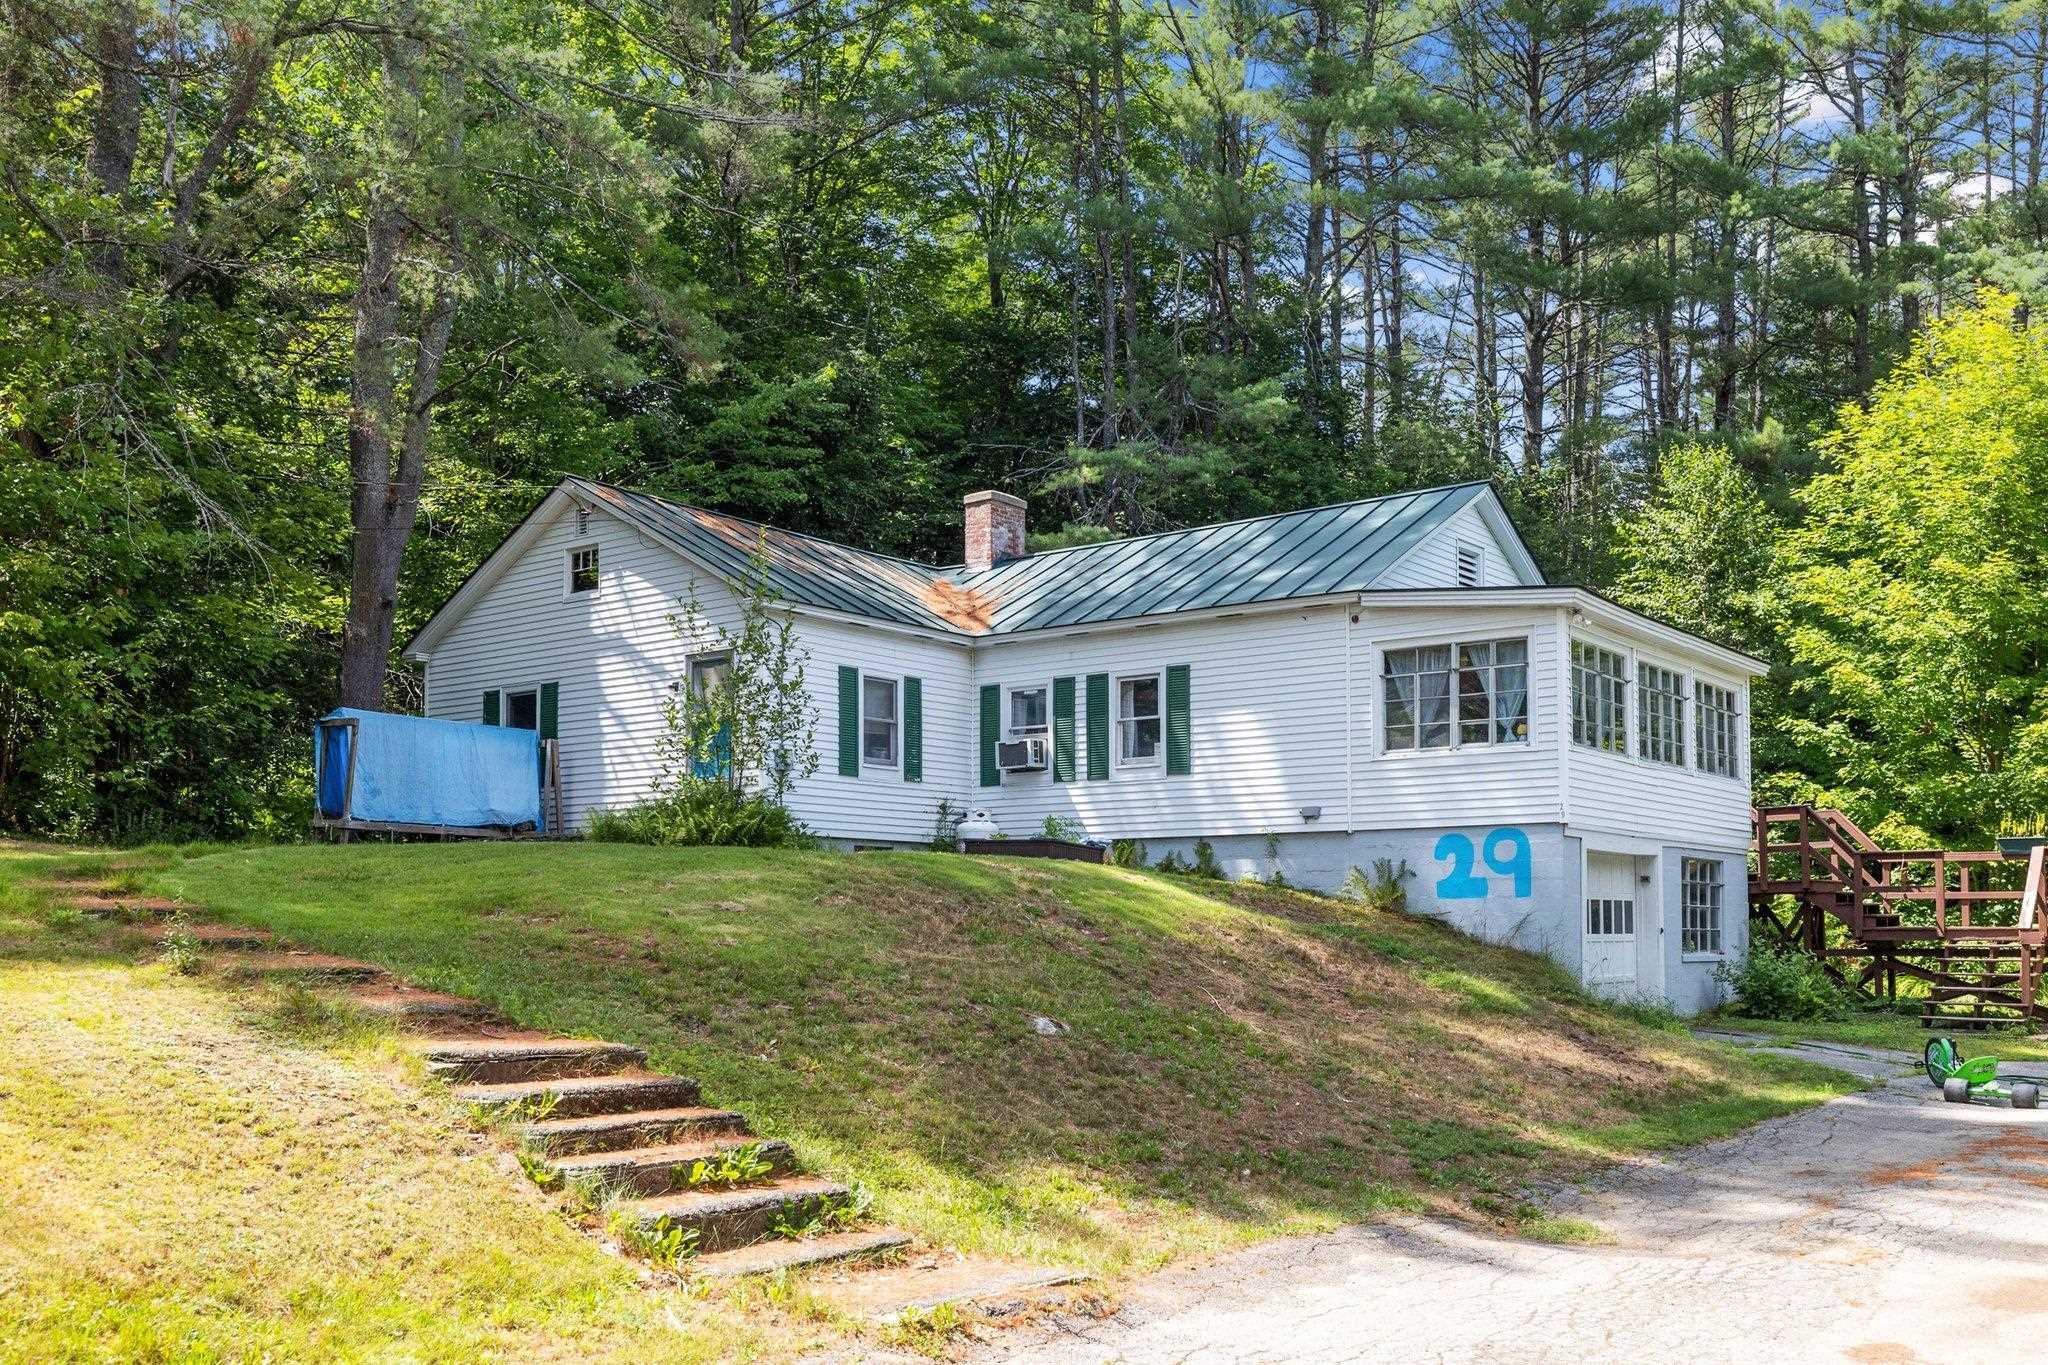 Newport NH 03773 Home for sale $List Price is $229,000